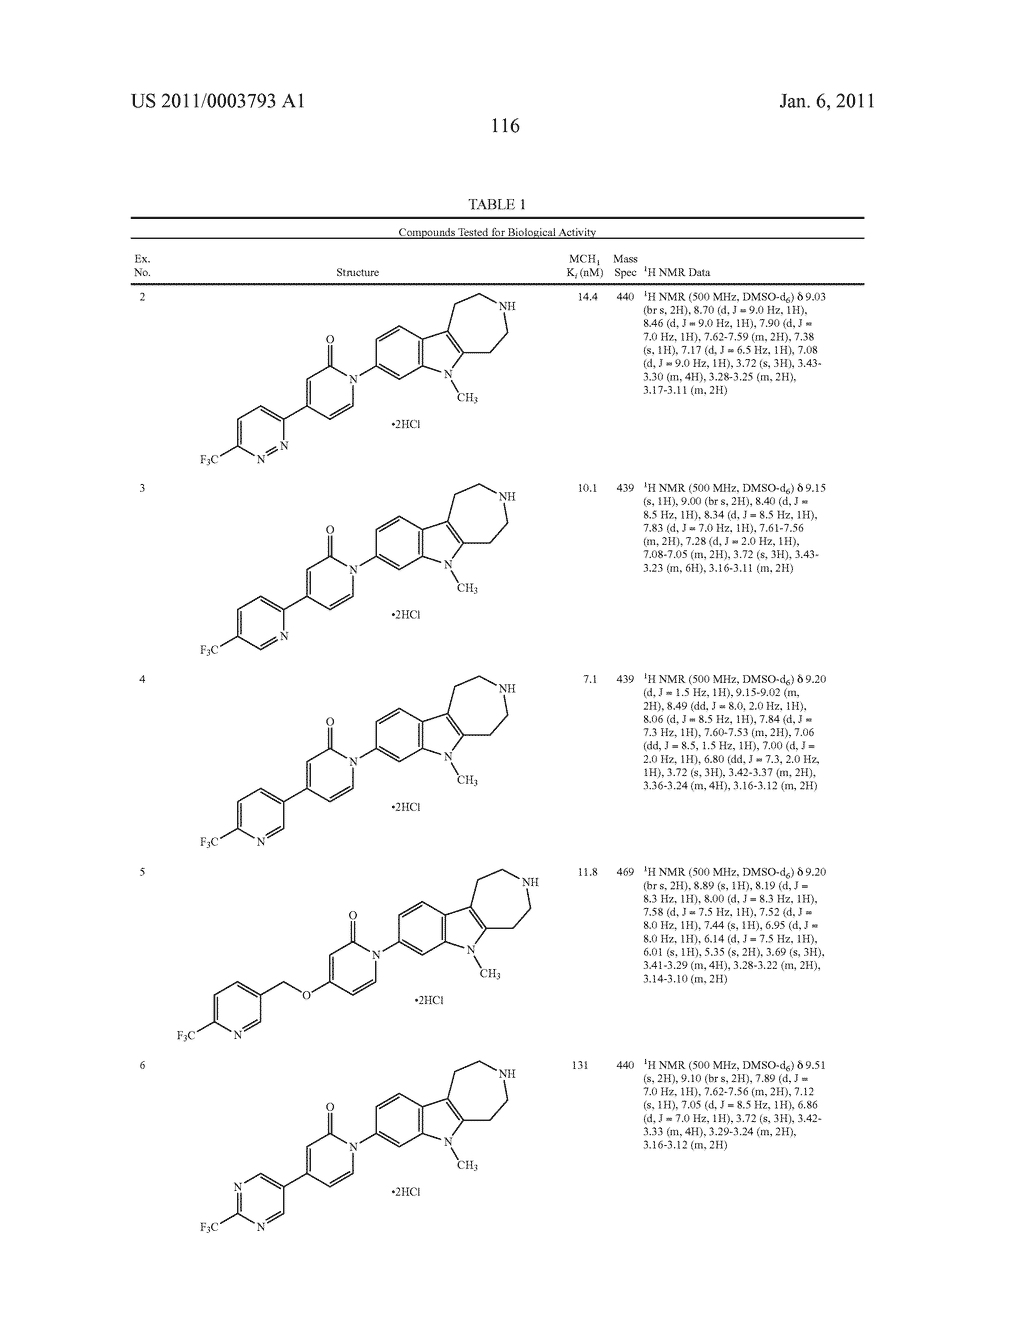 AZINONE-SUBSTITUTED AZEPINO[b]INDOLE AND PYRIDO-PYRROLO-AZEPINE MCH-1 ANTAGONISTS, METHODS OF MAKING, AND USE THEREOF - diagram, schematic, and image 117